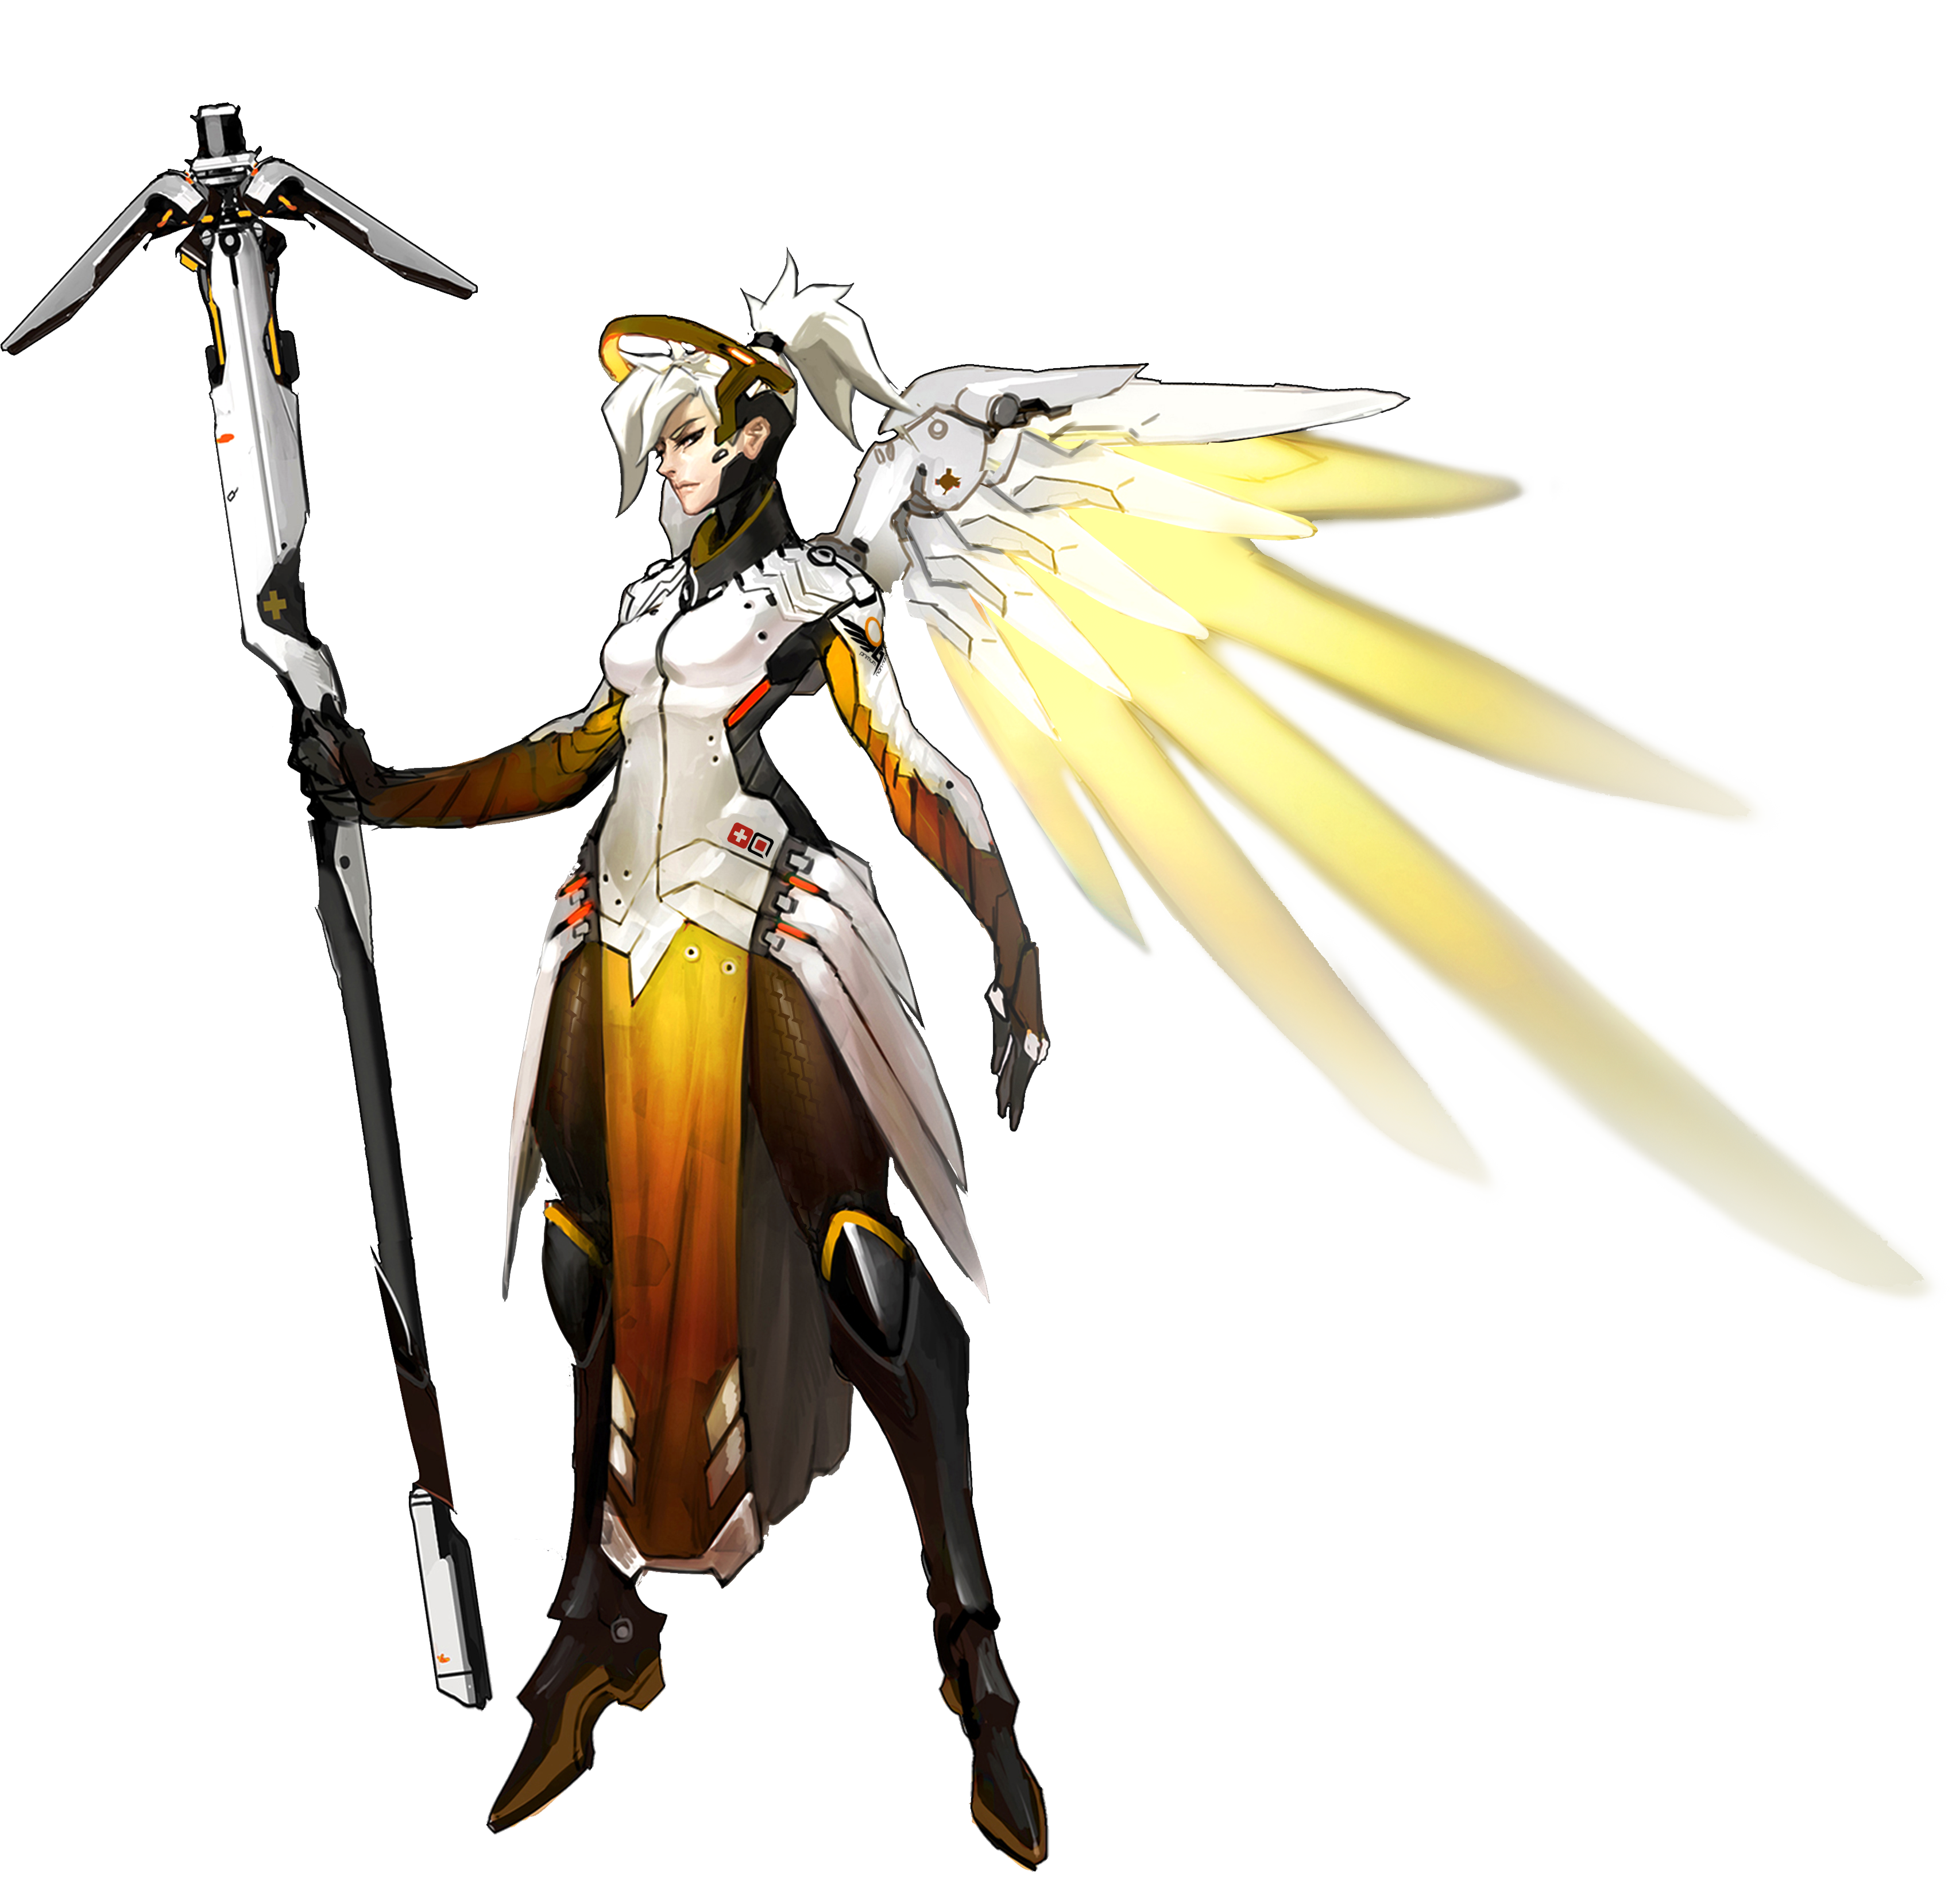 Overwatch Mercy Figure Action Figure Boxed Anime Character Model Cartoon  Toy PVC Action Figure Toy Collectibles Souvenirs Gift : Amazon.co.uk: Toys  & Games